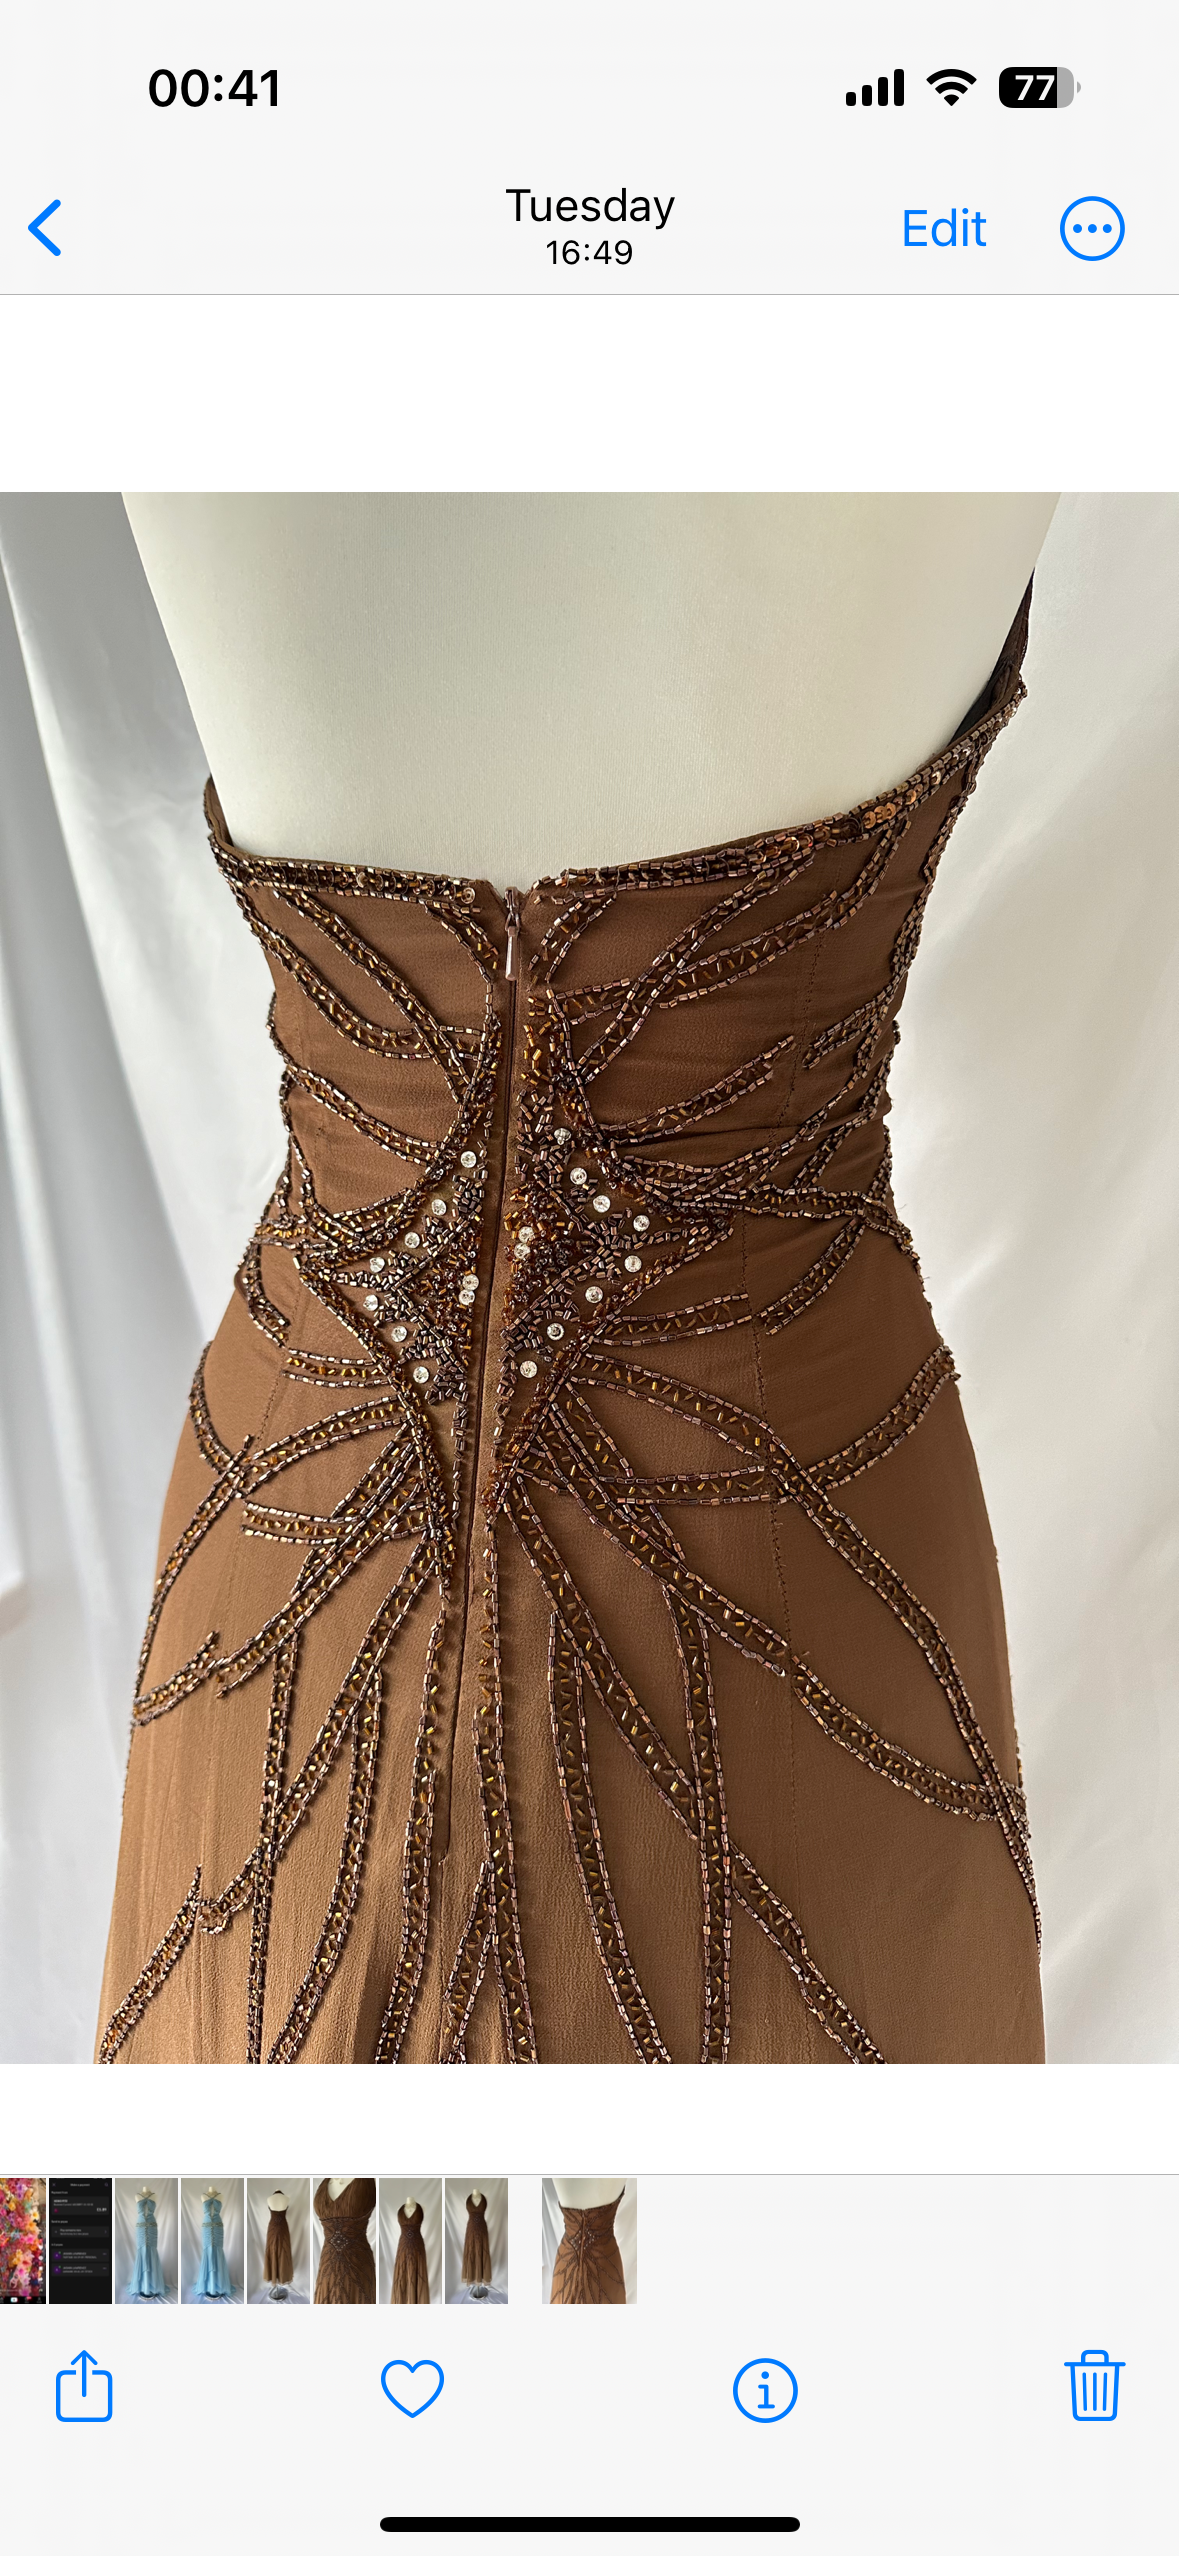 Chocolate Cocoa Soirée Vintage Embellished Silk Gown